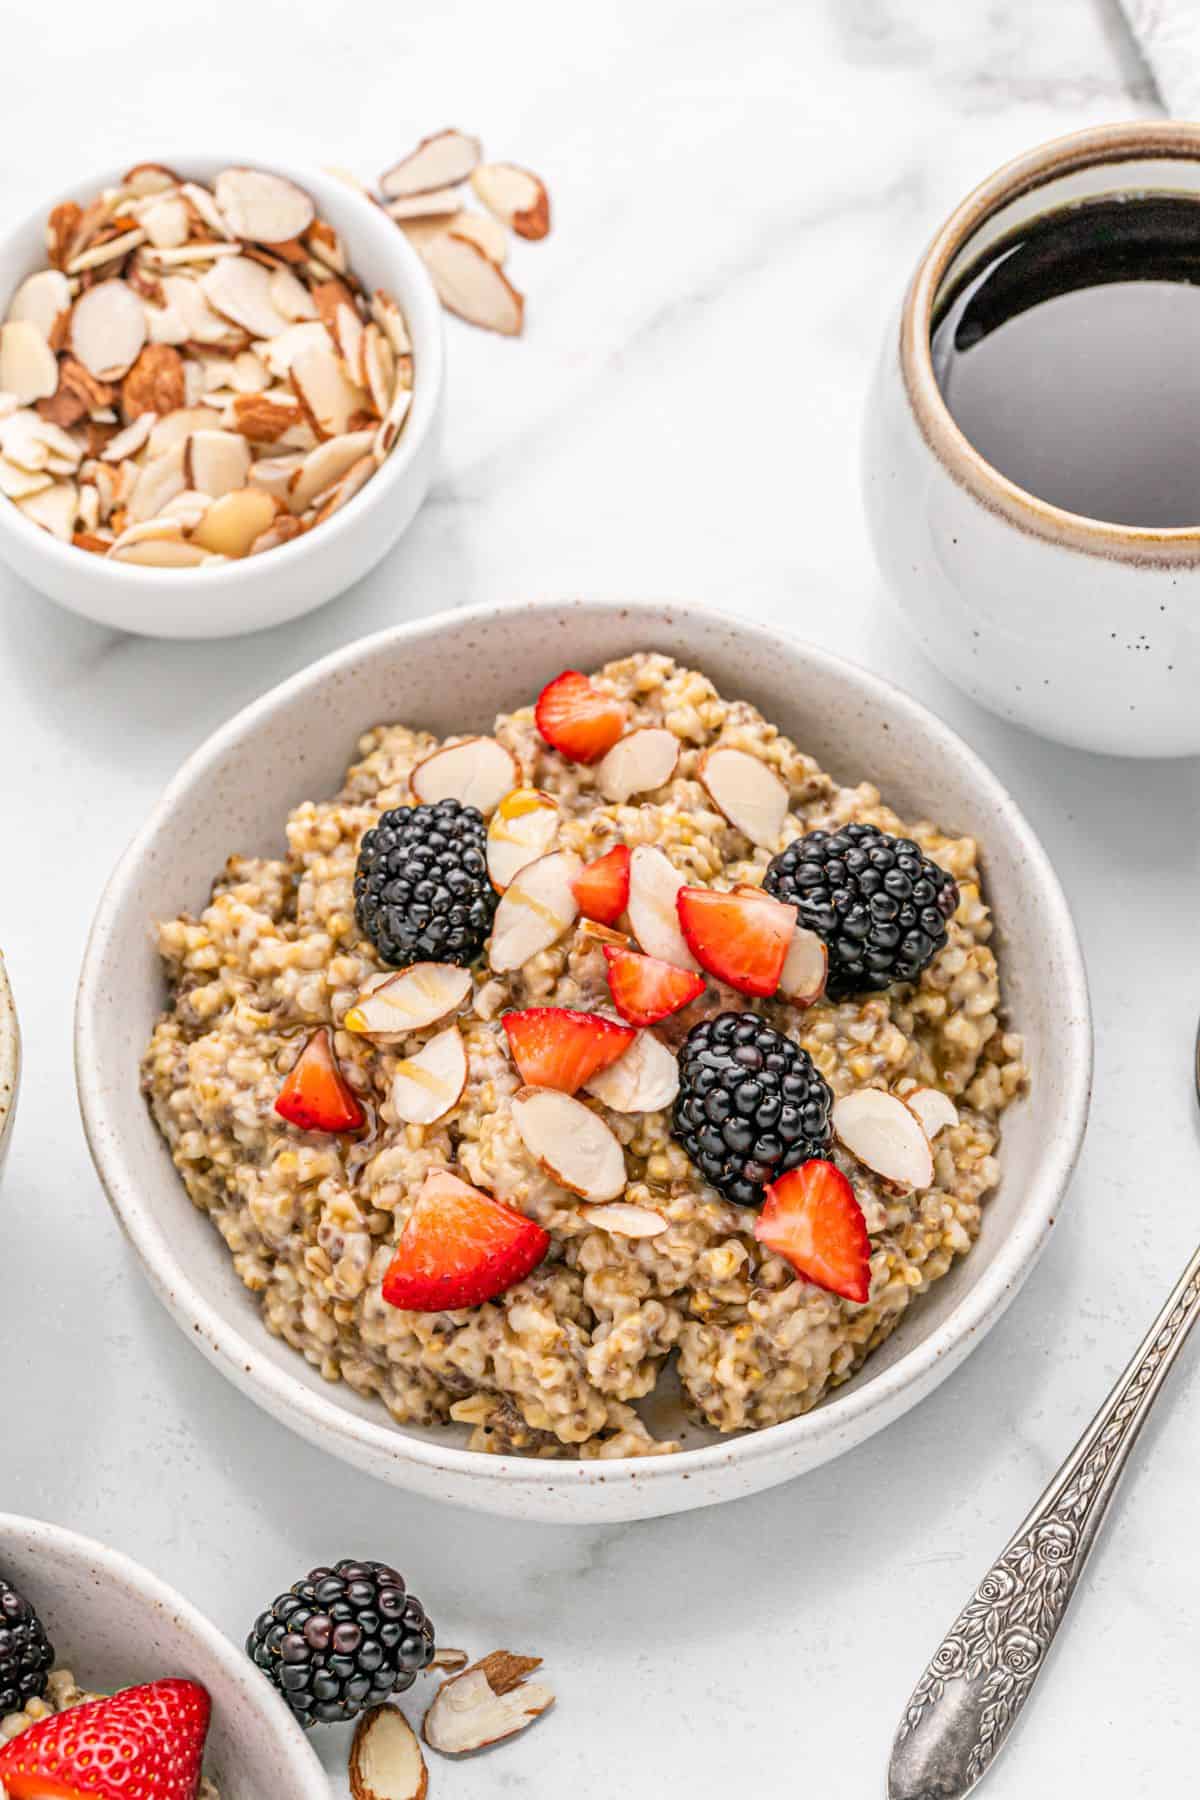 Bowl of oats with berries and cup of coffee.